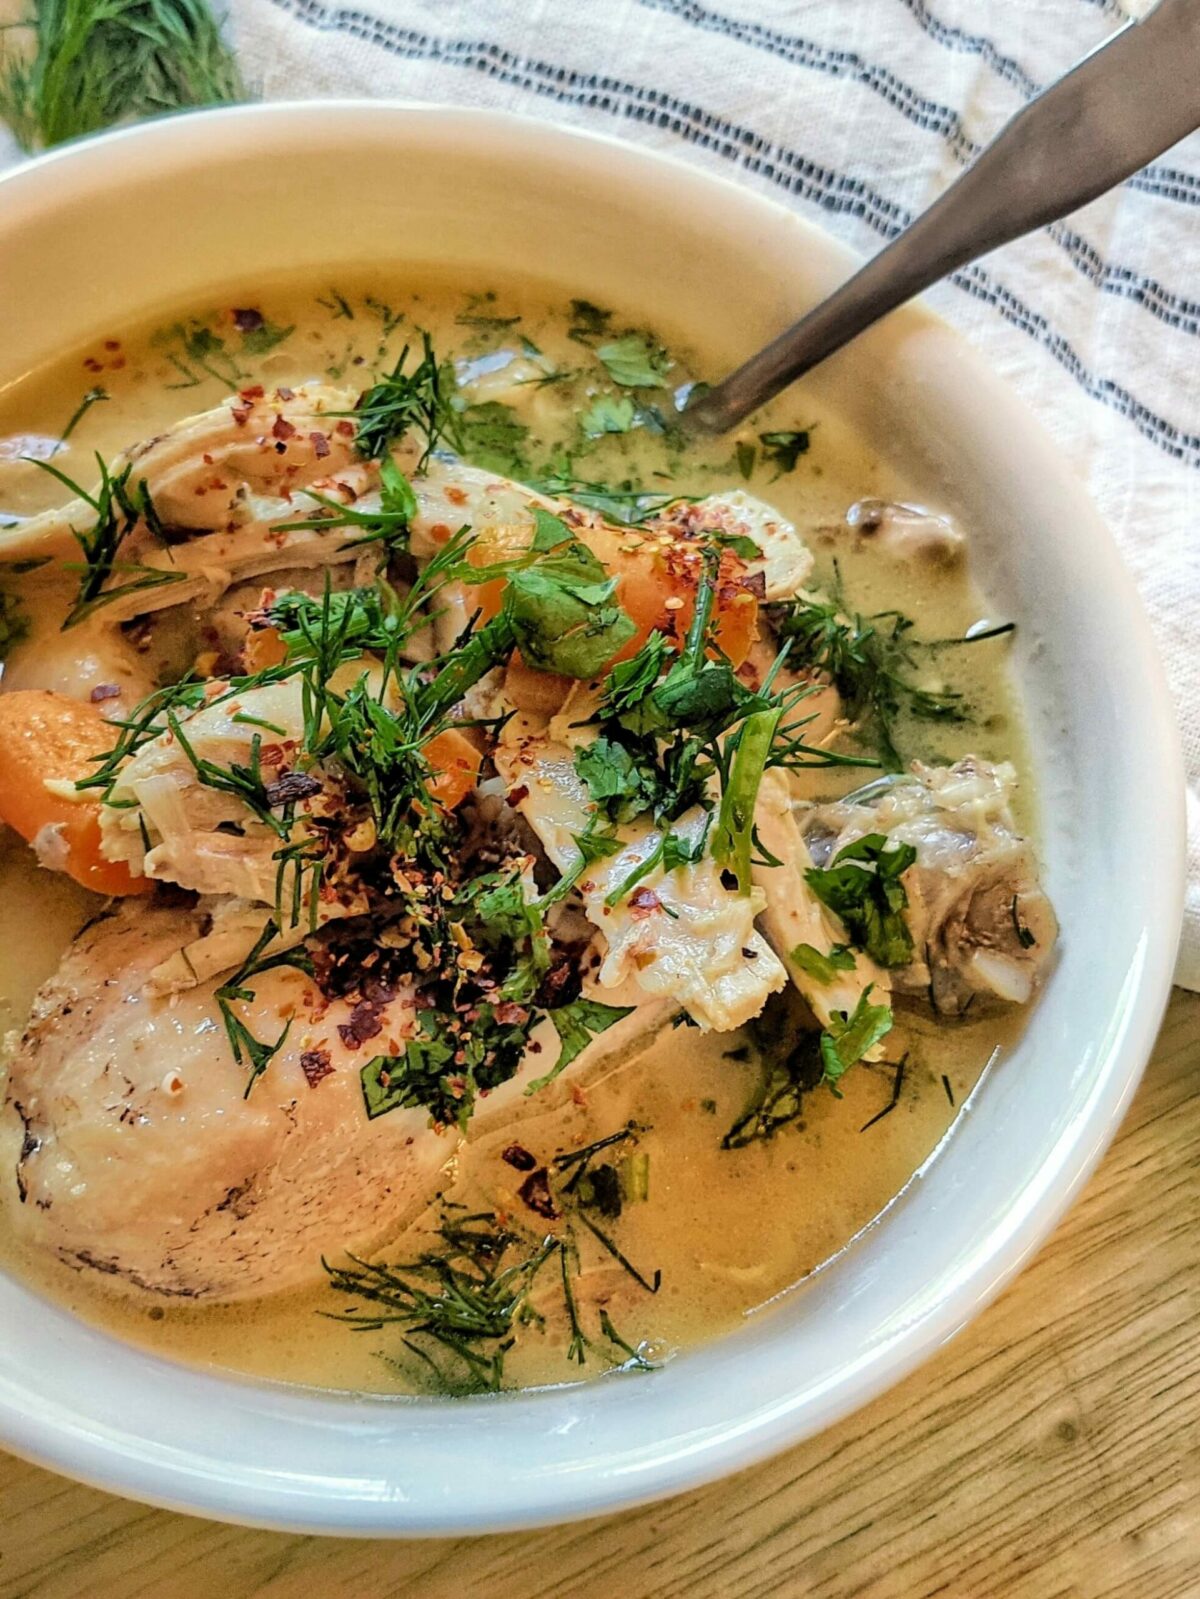 A single serving of homemade chicken soup garnished with red chili flakes, dill, and cilantro.